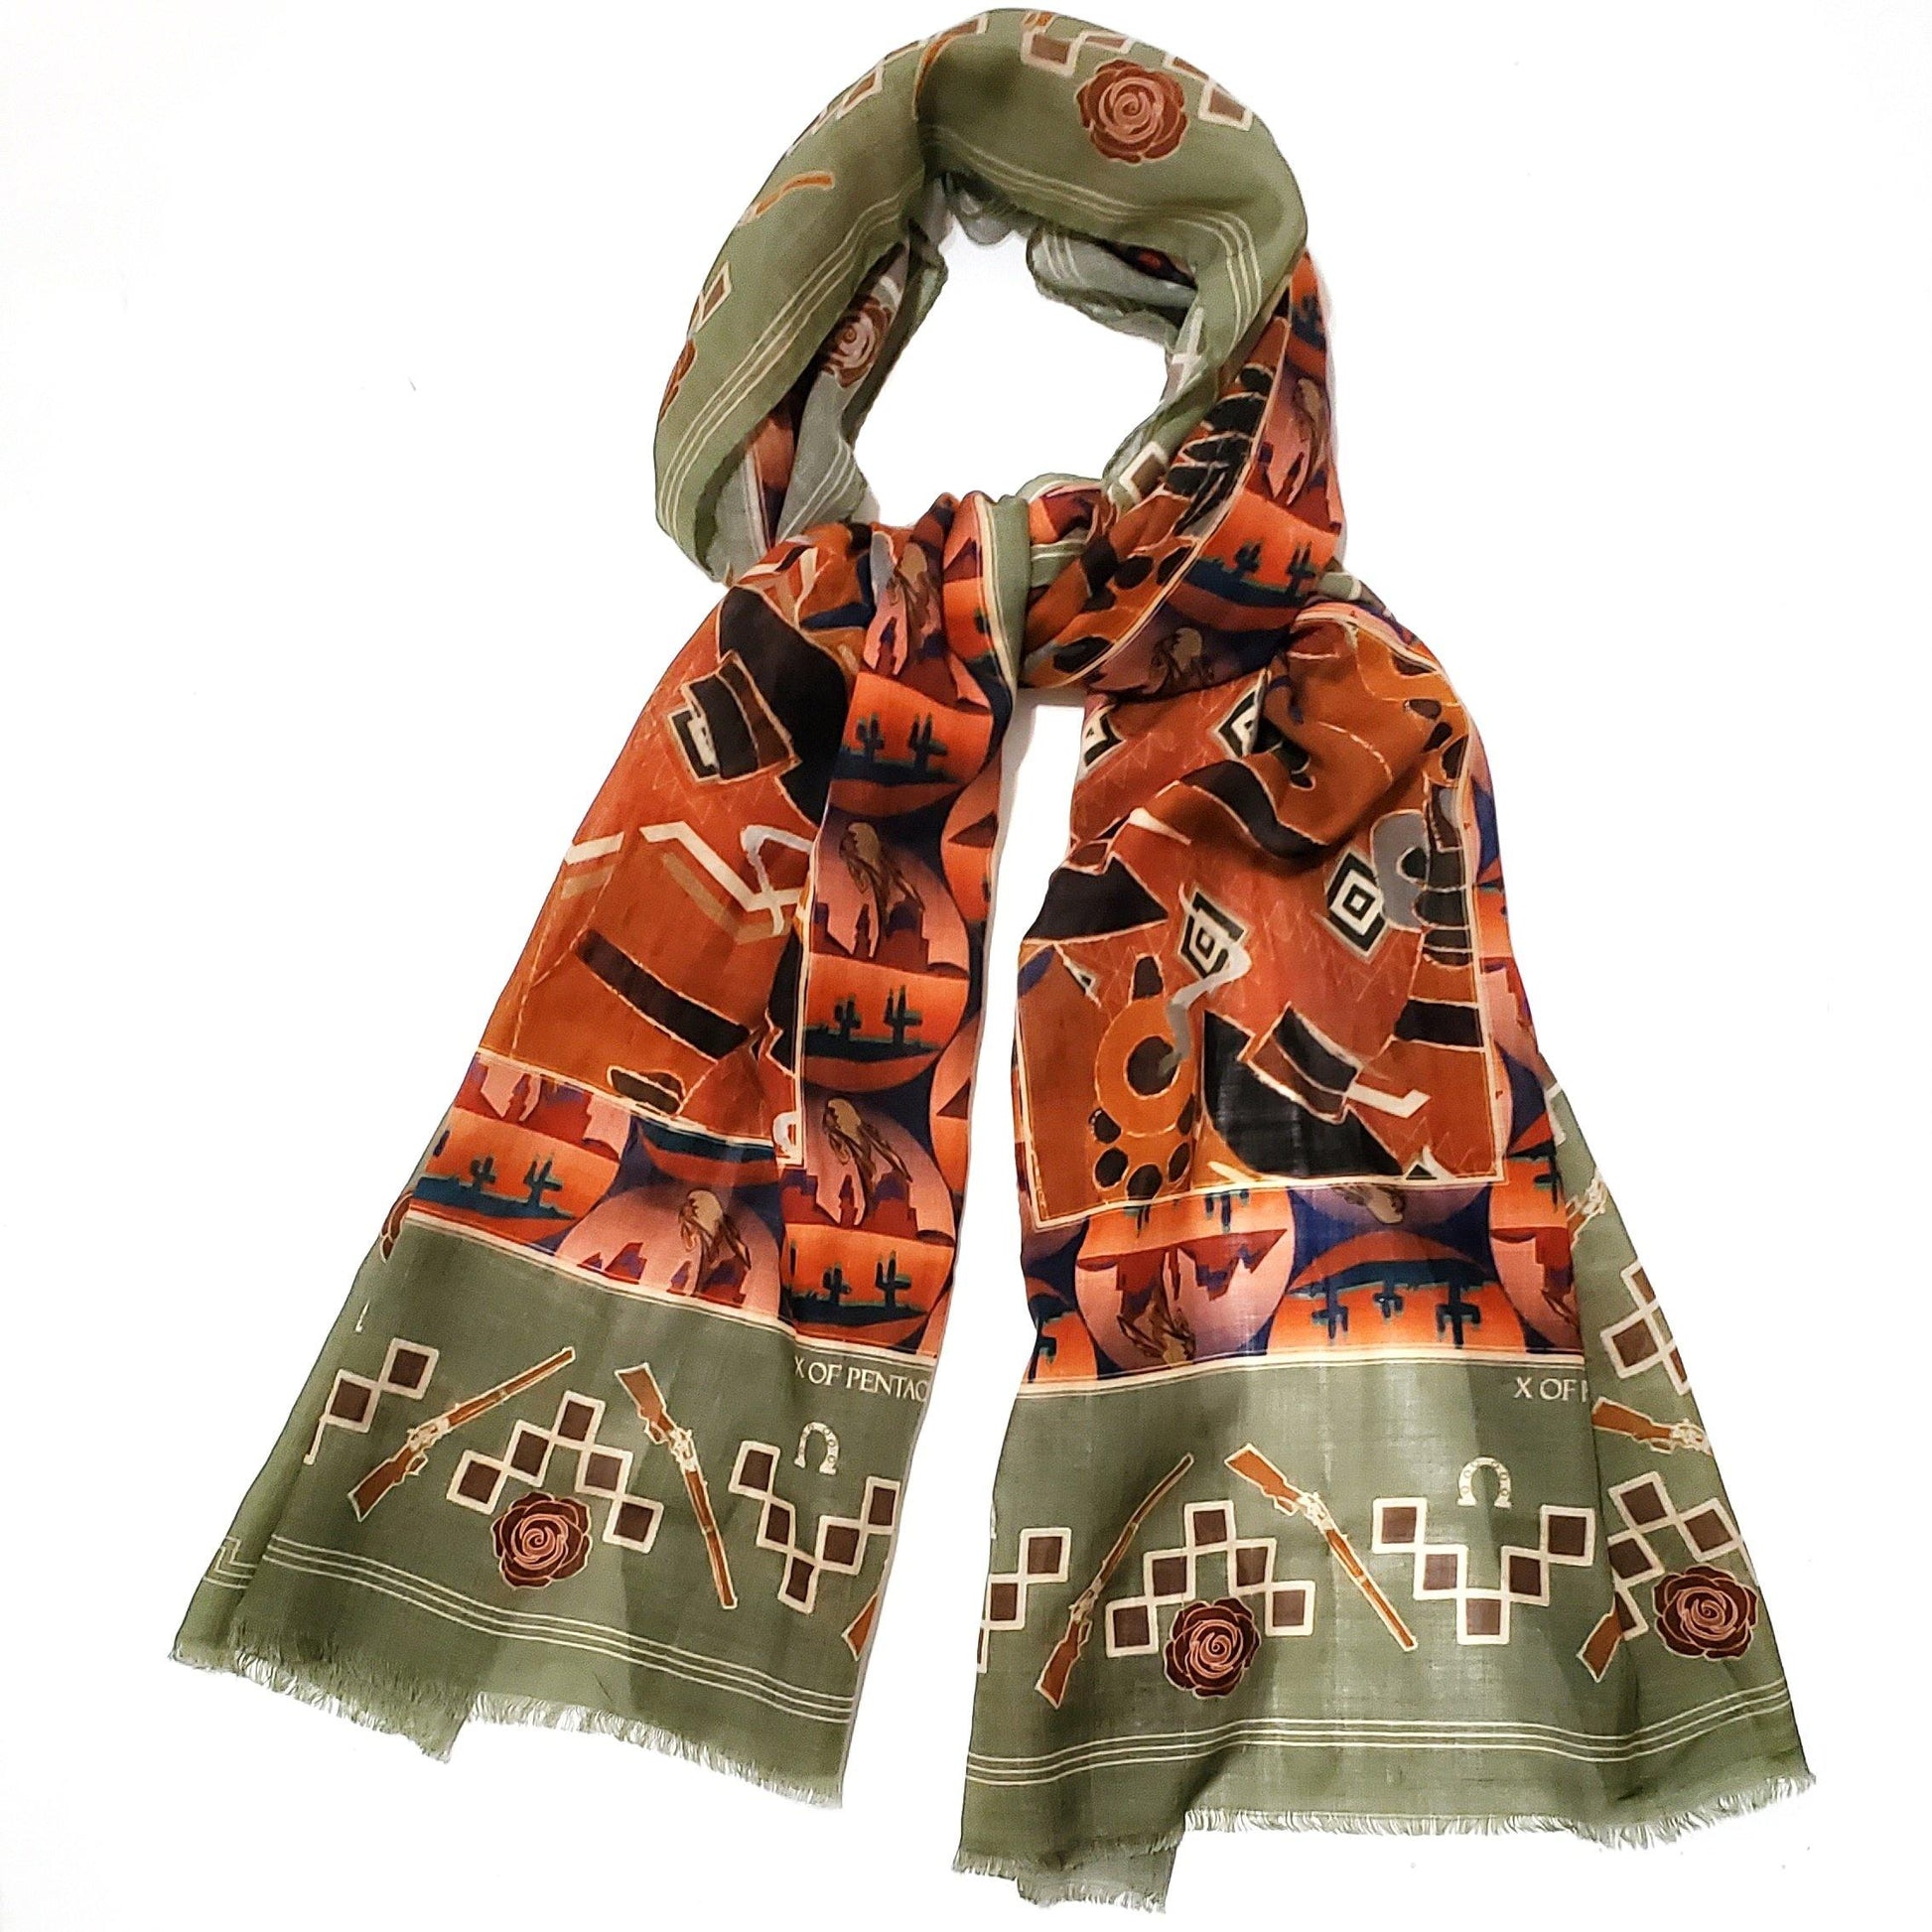 Outlaw Cowboy Print Scarves - Made in Italy - X Of Pentacles